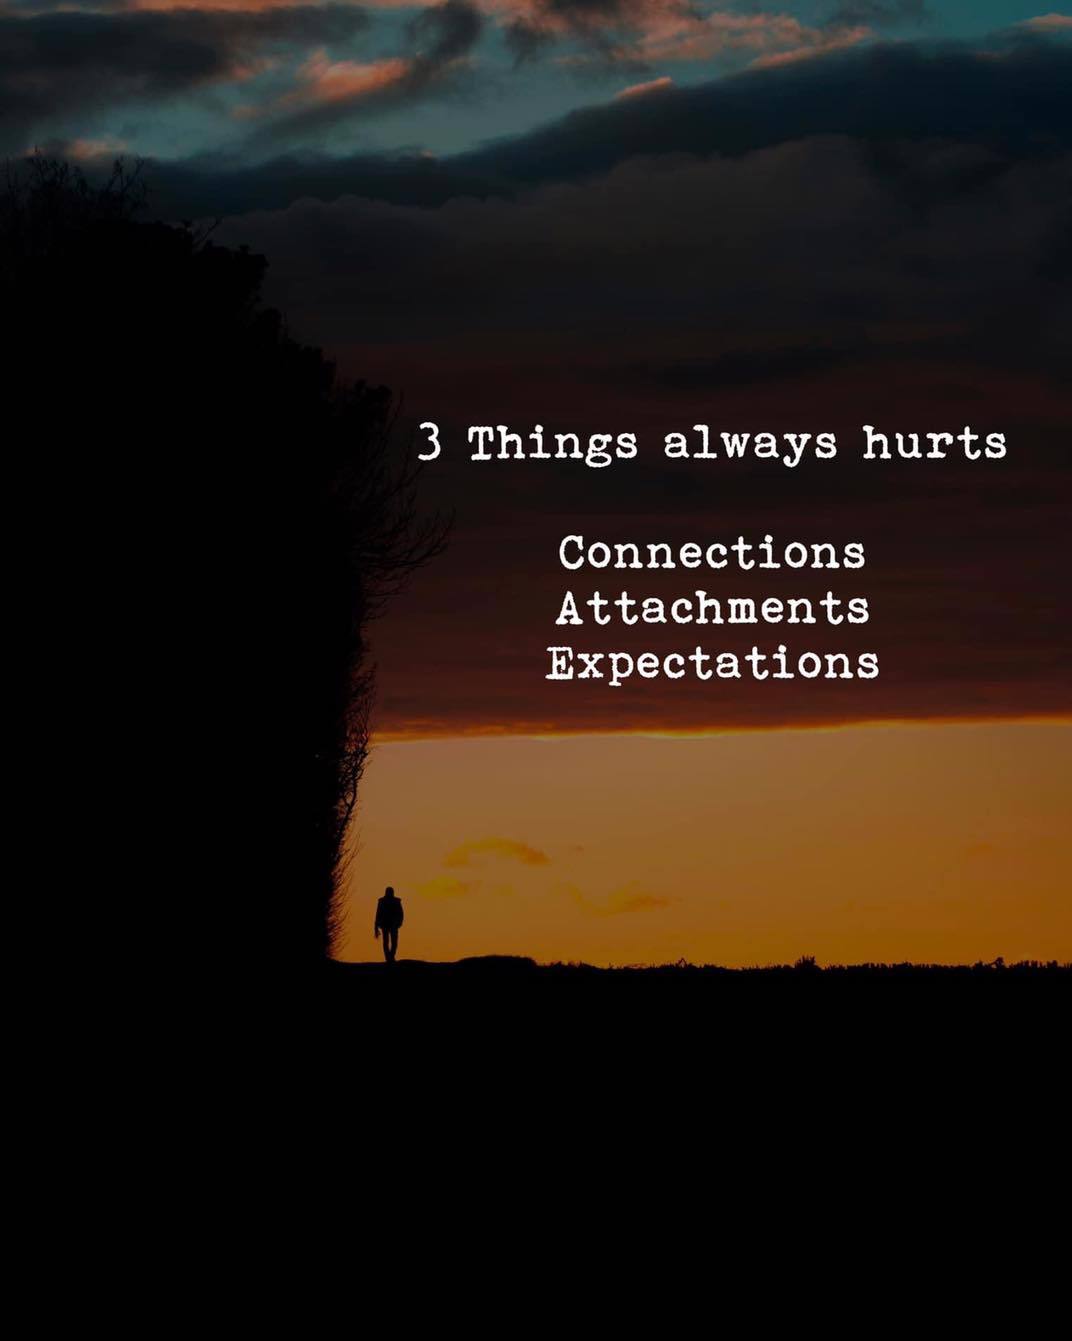 Quotes 'nd Notes - 3 things always hurts..